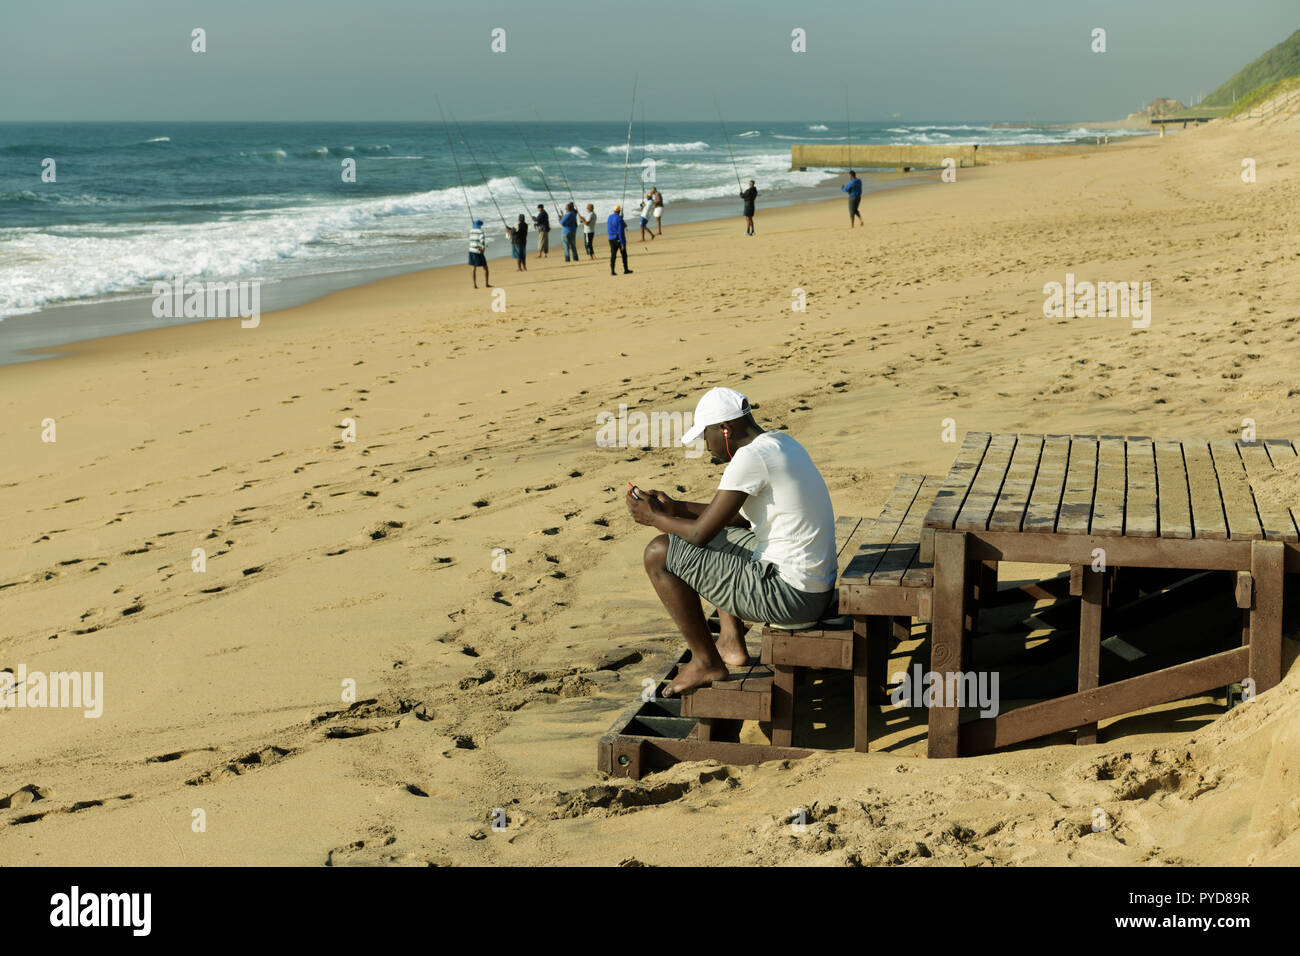 Durban, KwaZulu-Natal, single young adult male looking at mobile phone, sitting on steps of beach stairs where fishermen are fishing, The Bluff Stock Photo